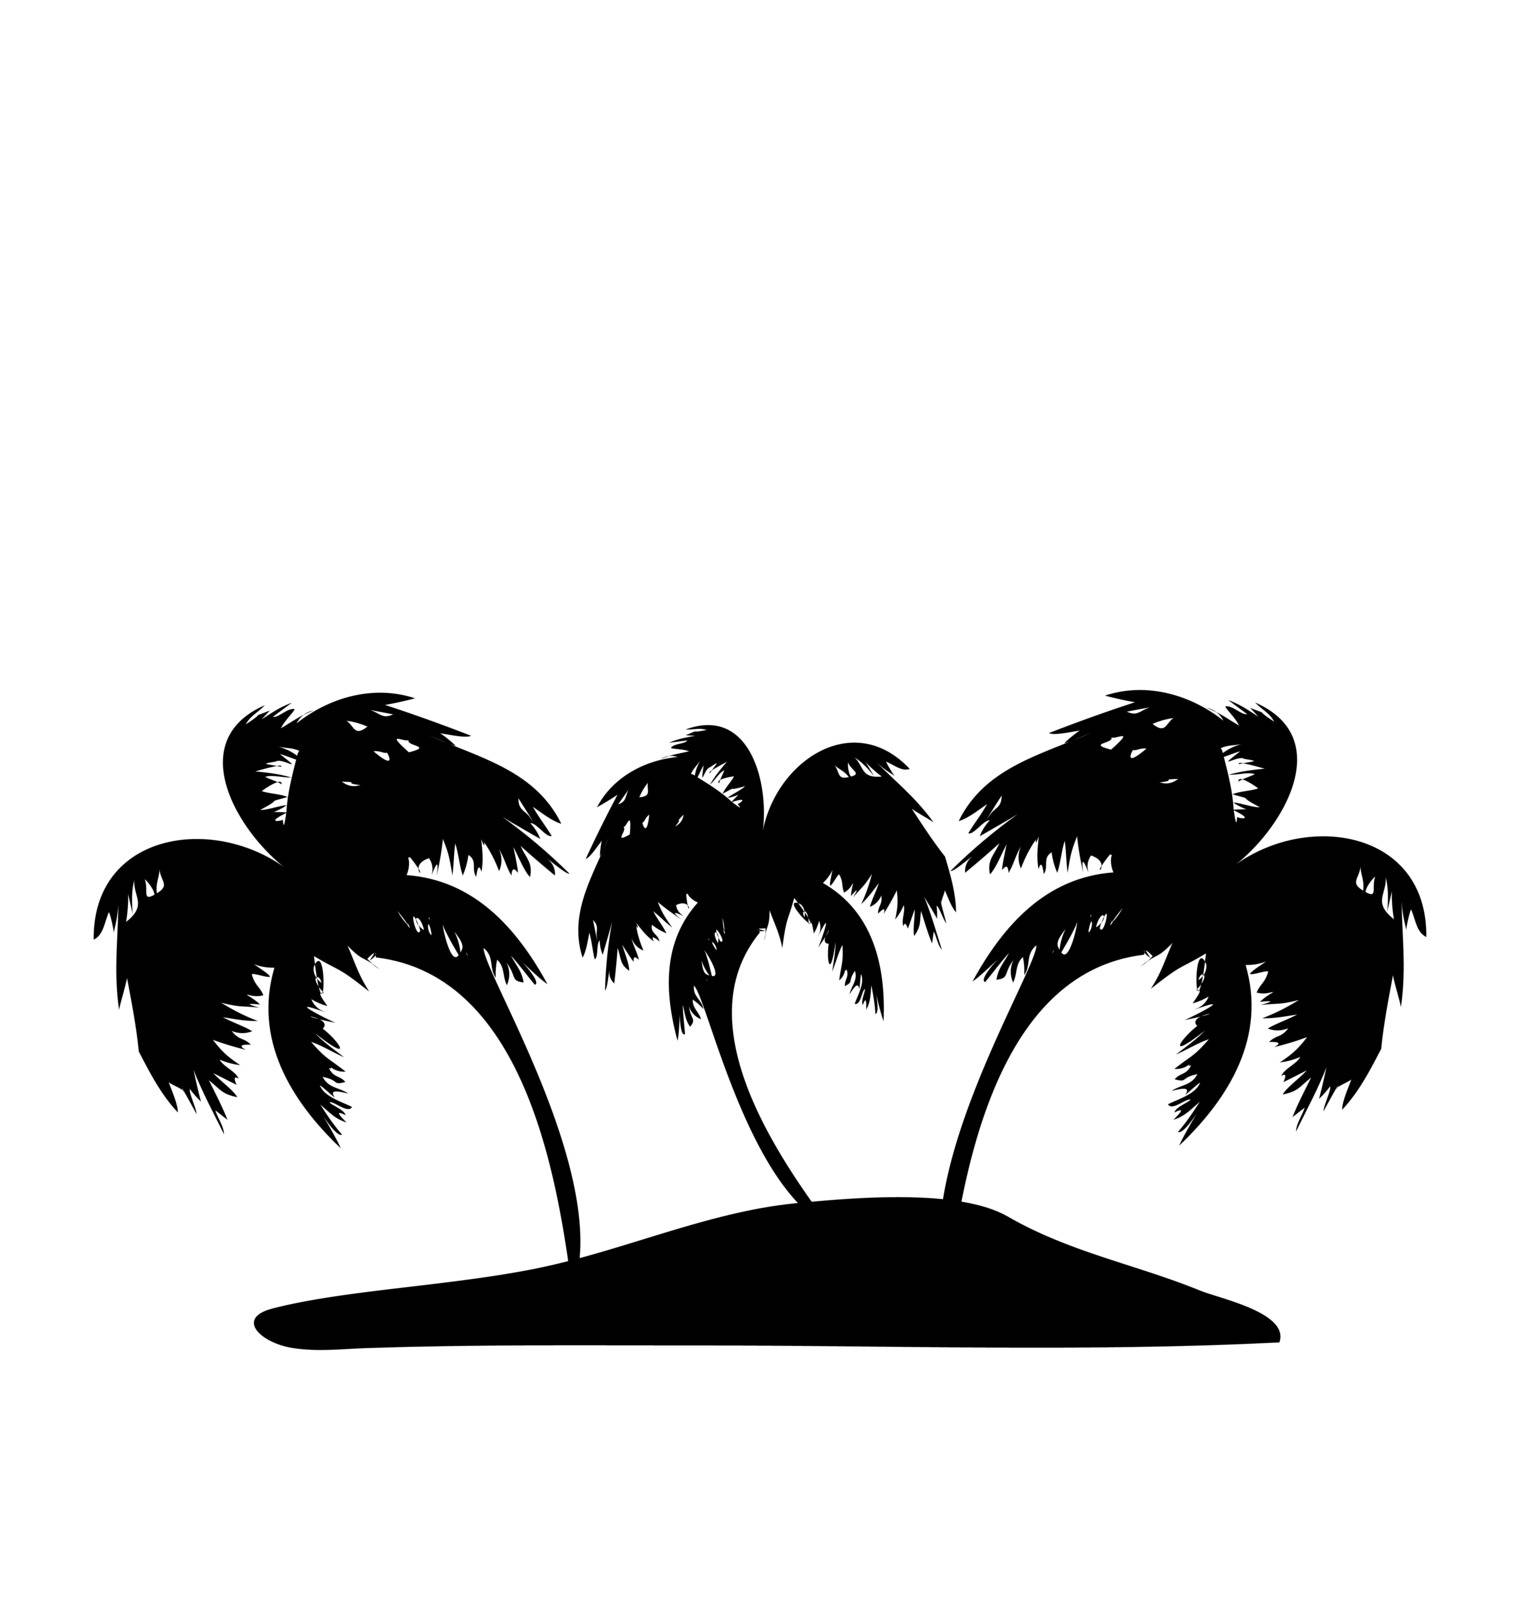 Tropical island with palm trees silhouette by smeagorl